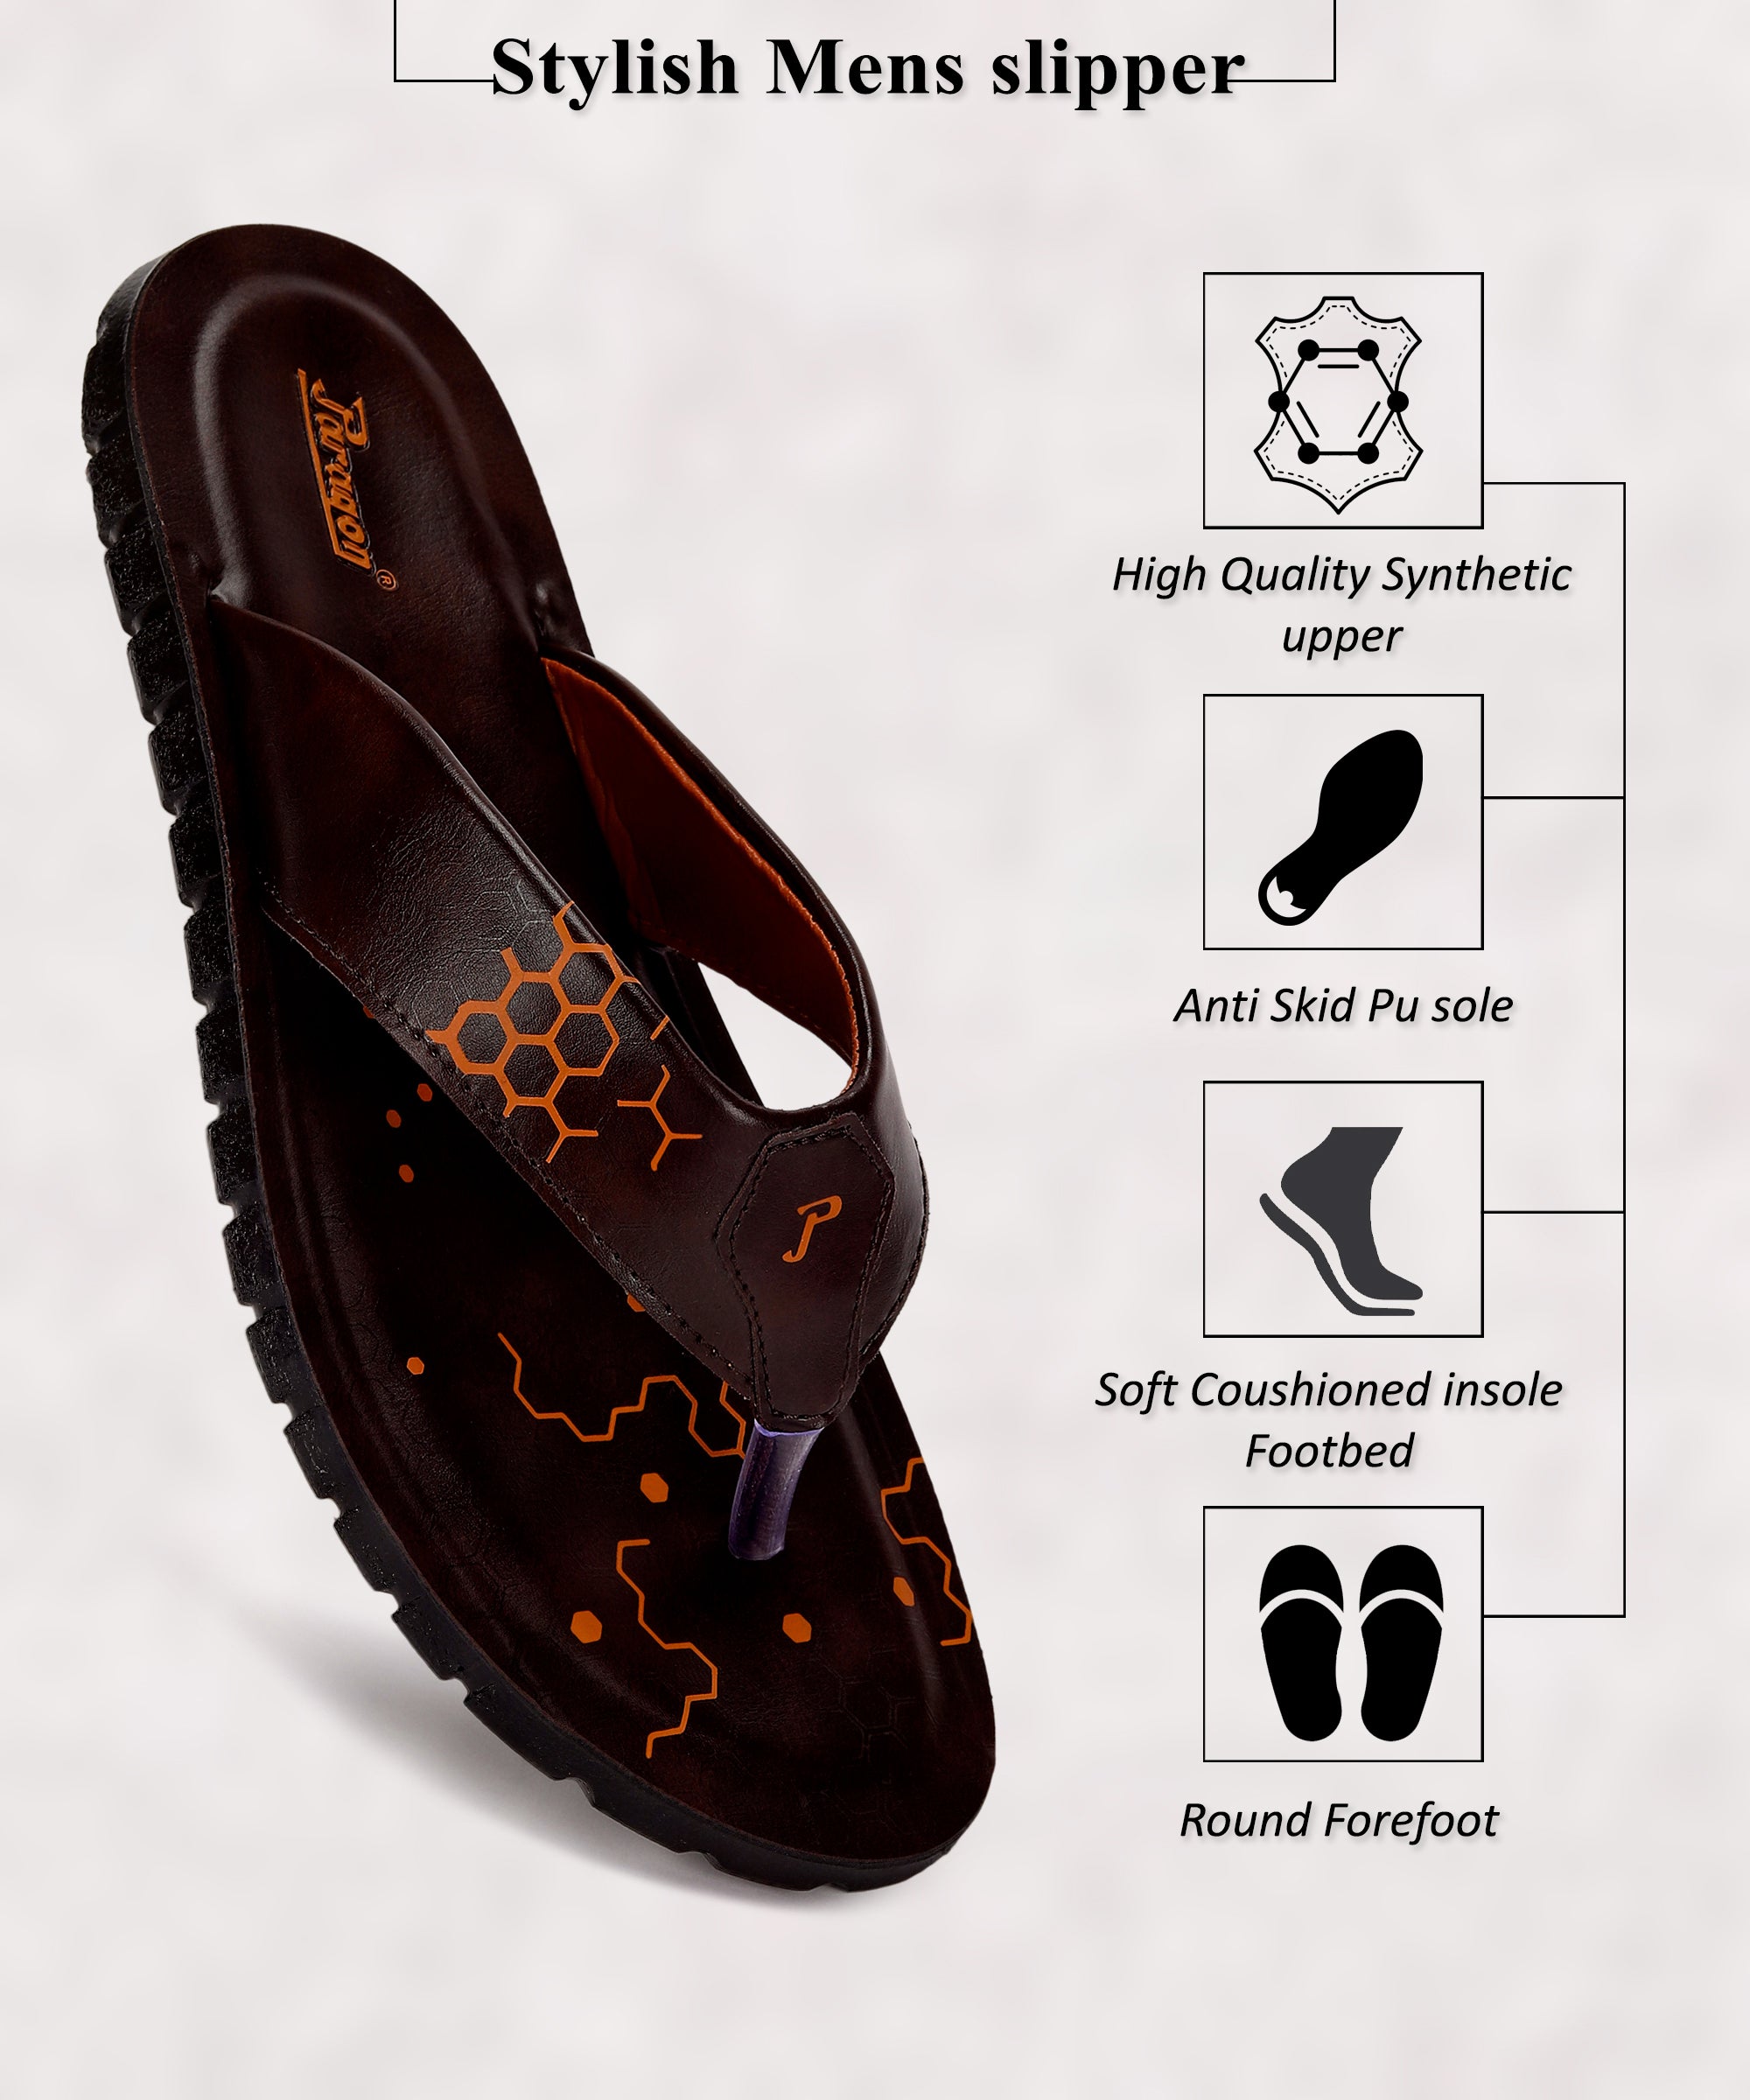 Paragon PUK2225G Men Stylish Sandals | Comfortable Sandals for Daily Outdoor Use | Casual Formal Sandals with Cushioned Soles